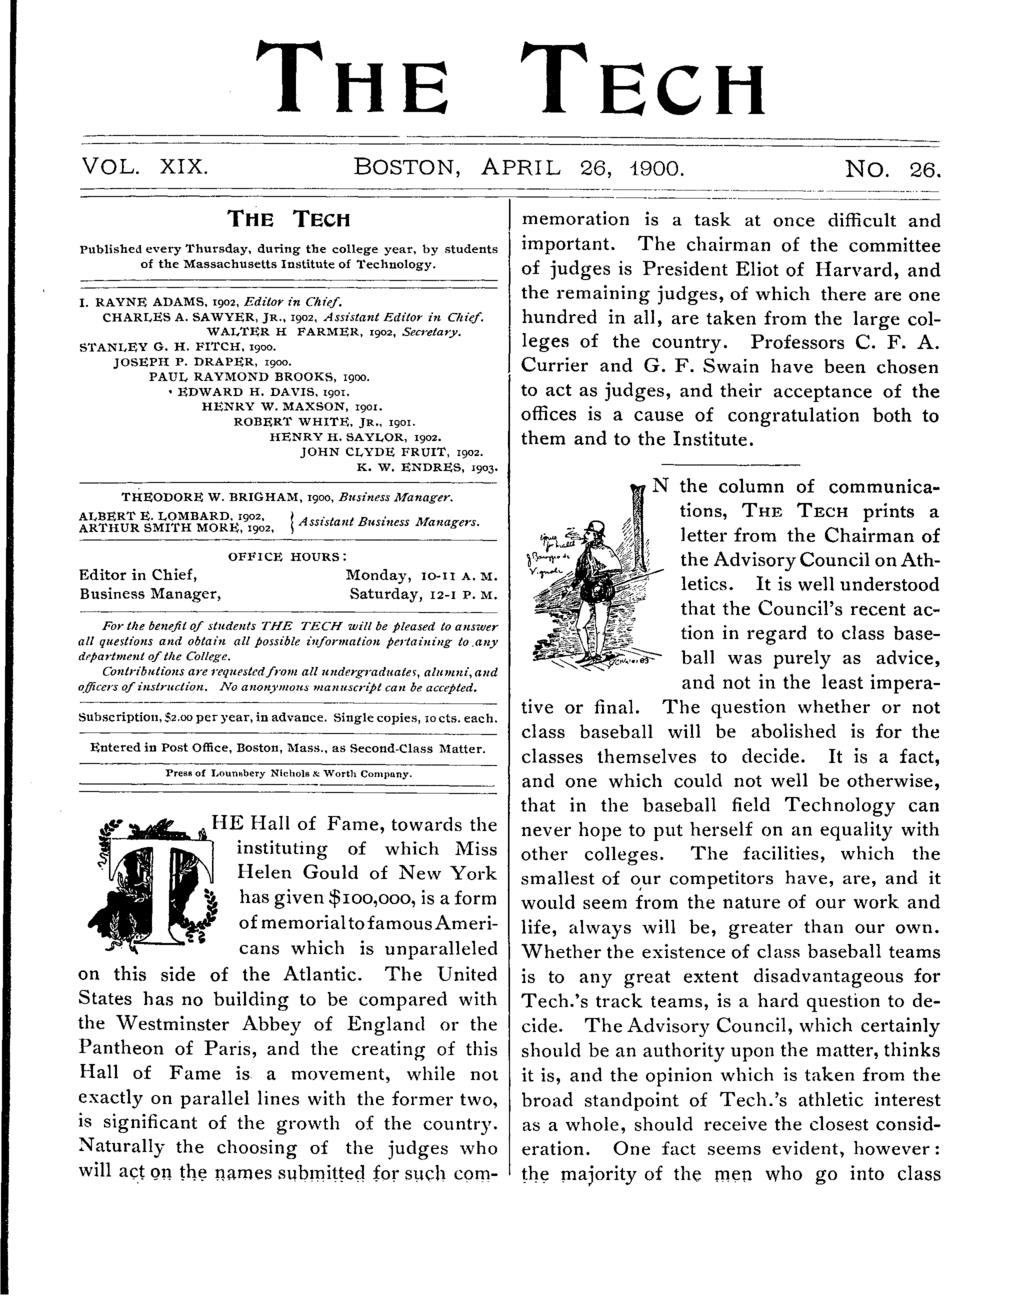 THE TECH VOL. XX. BOSTON, APRL 26, 1900. NO. 26. THE TECH Publshed every Thursday, durng the college year, by students of the Massachusetts nsttute of Technology.. RAYNE ADAMS, 902, Edtor n Chef.